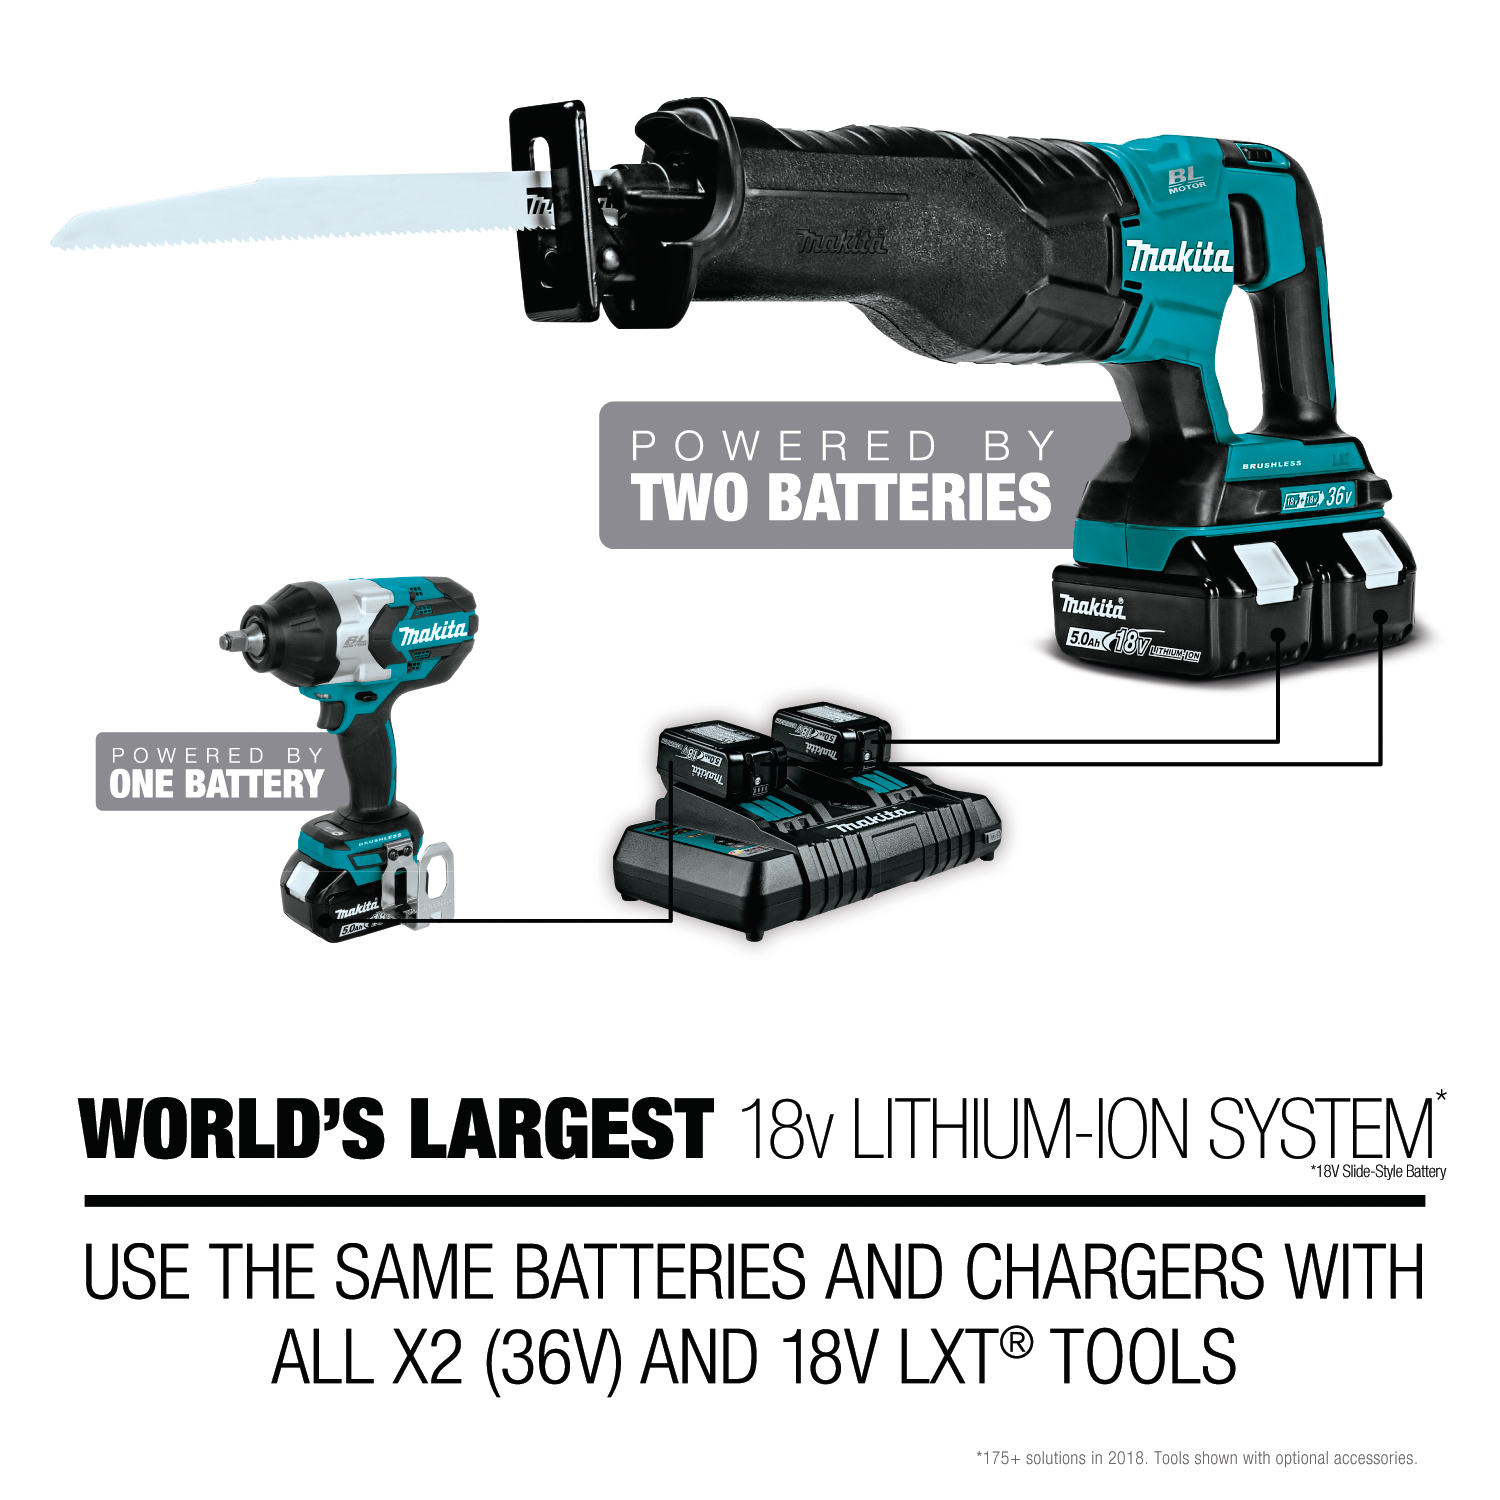 4 Makita Stocking Stuffers Perfect For The Holidays